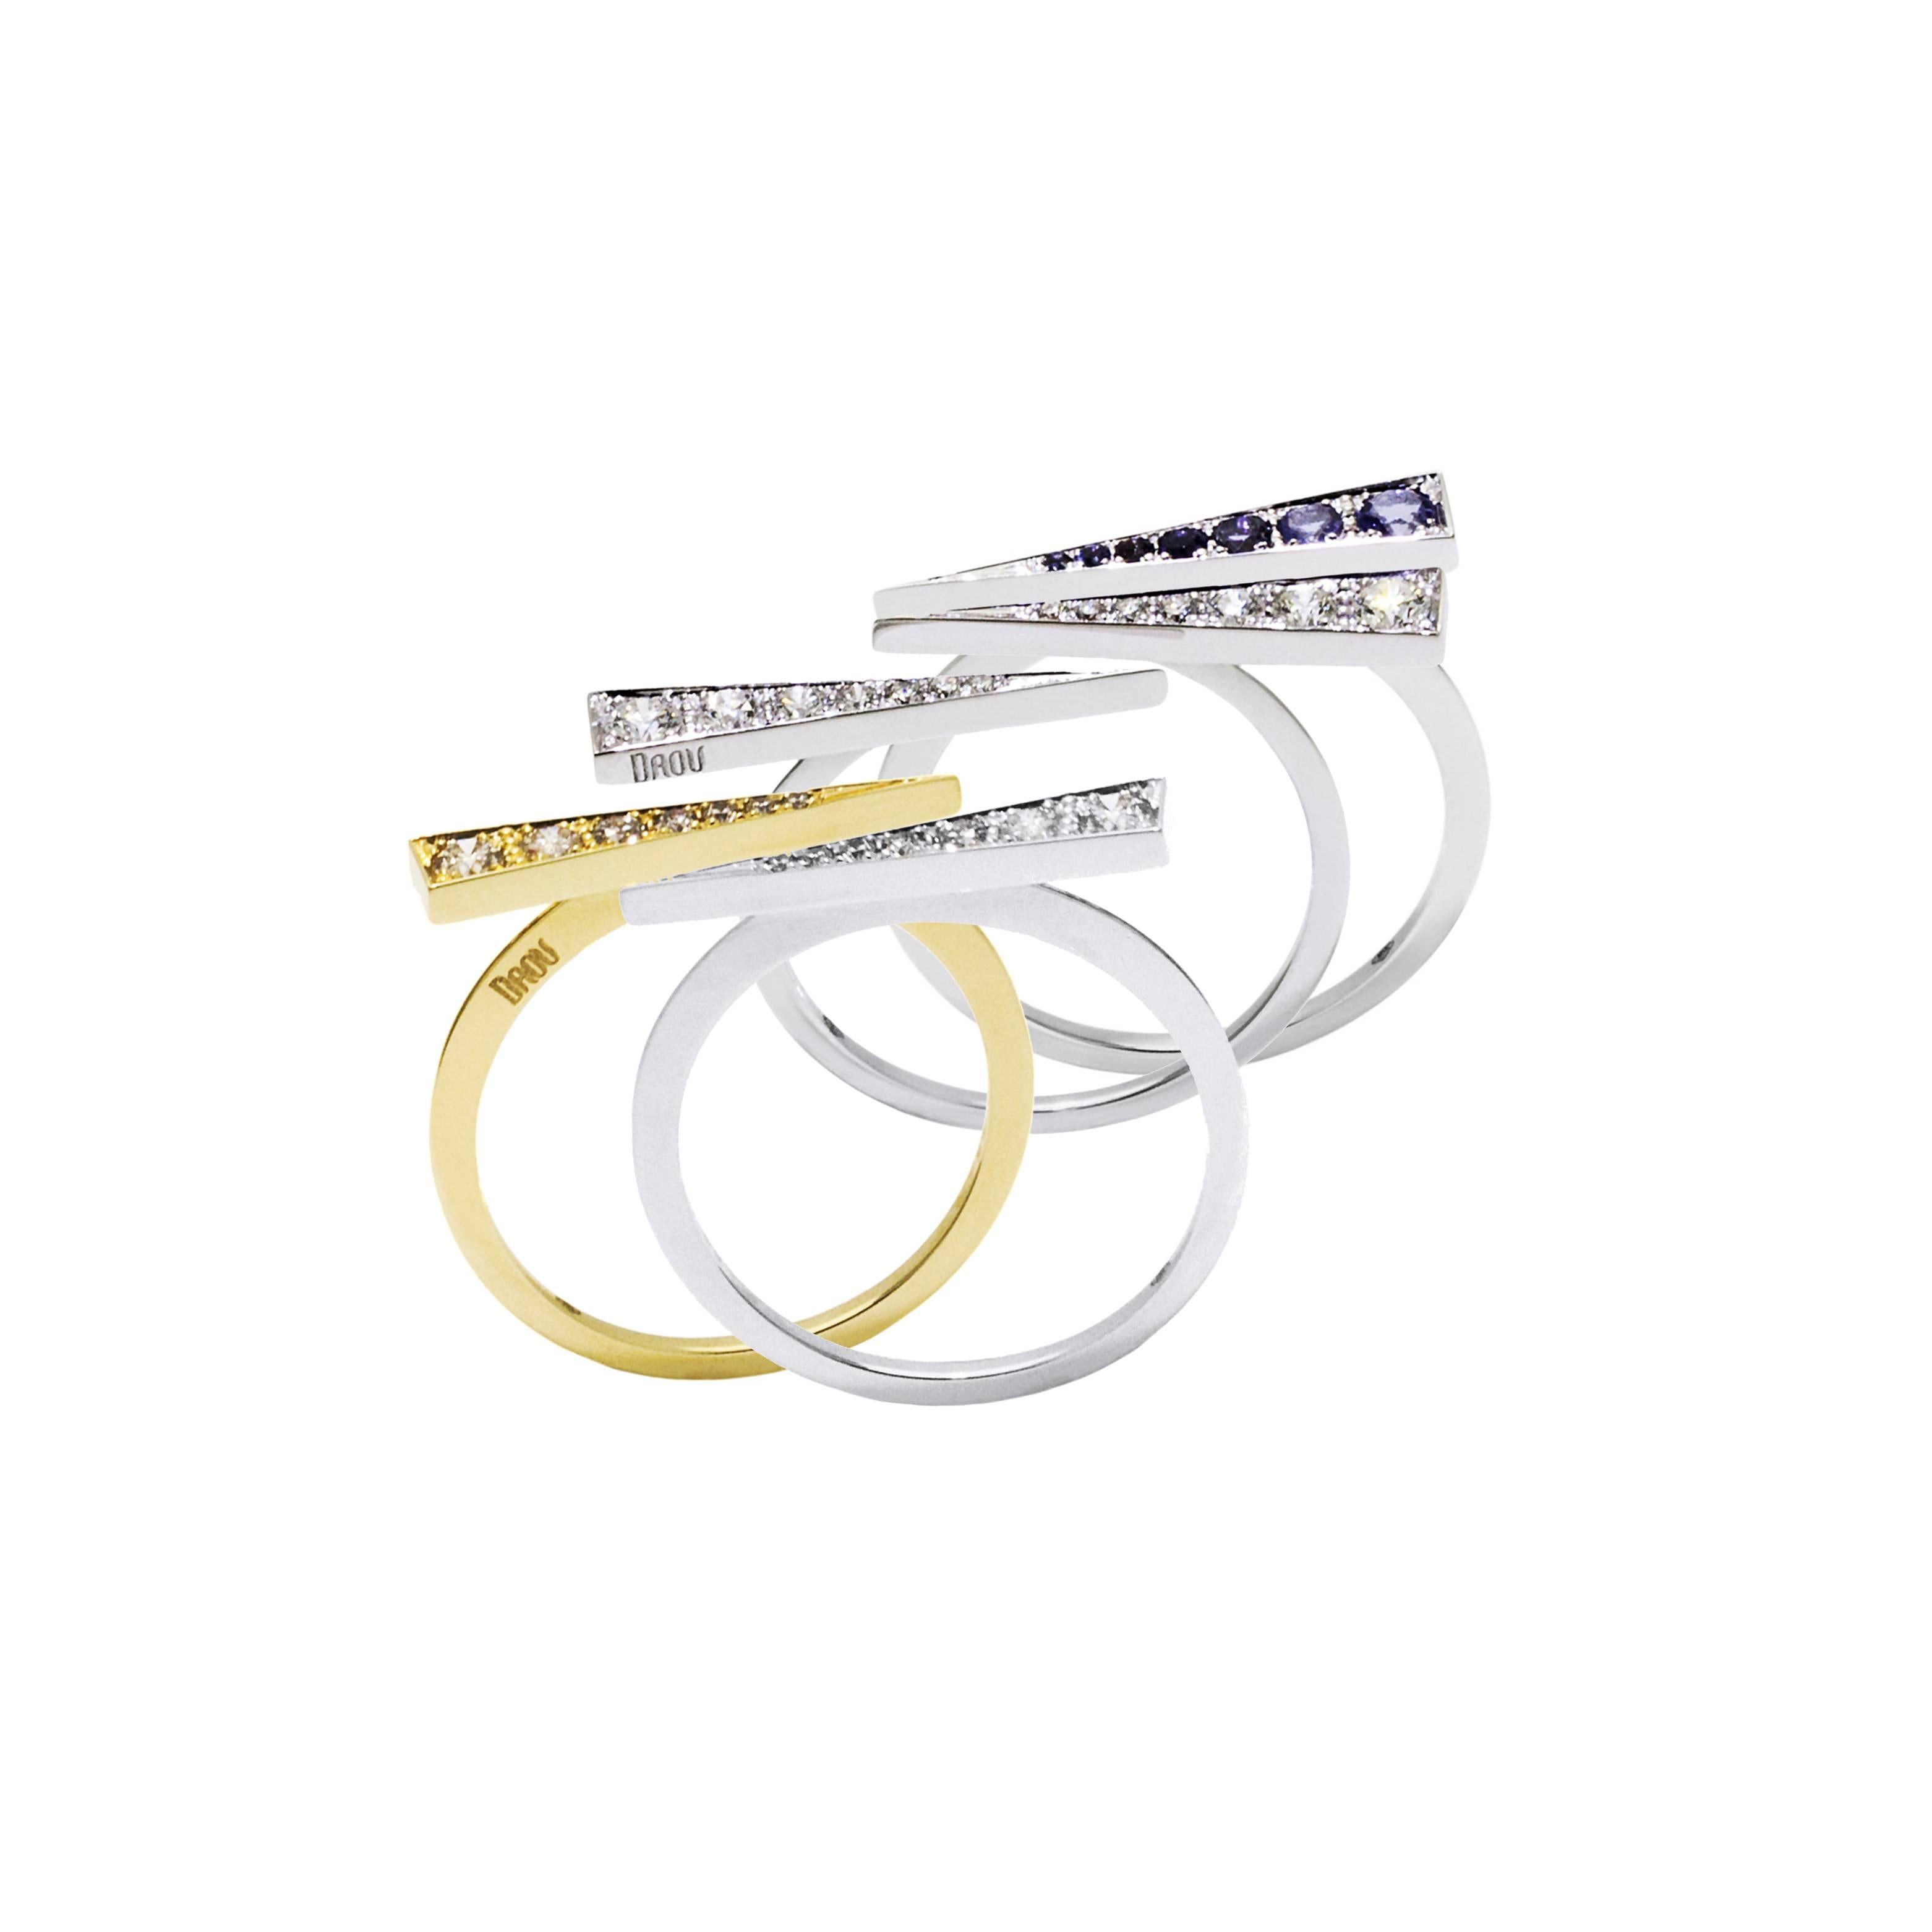 Women's or Men's Daou Spark Ring in Iolite and White Gold, Dynamic and Delicate Stacking Design For Sale